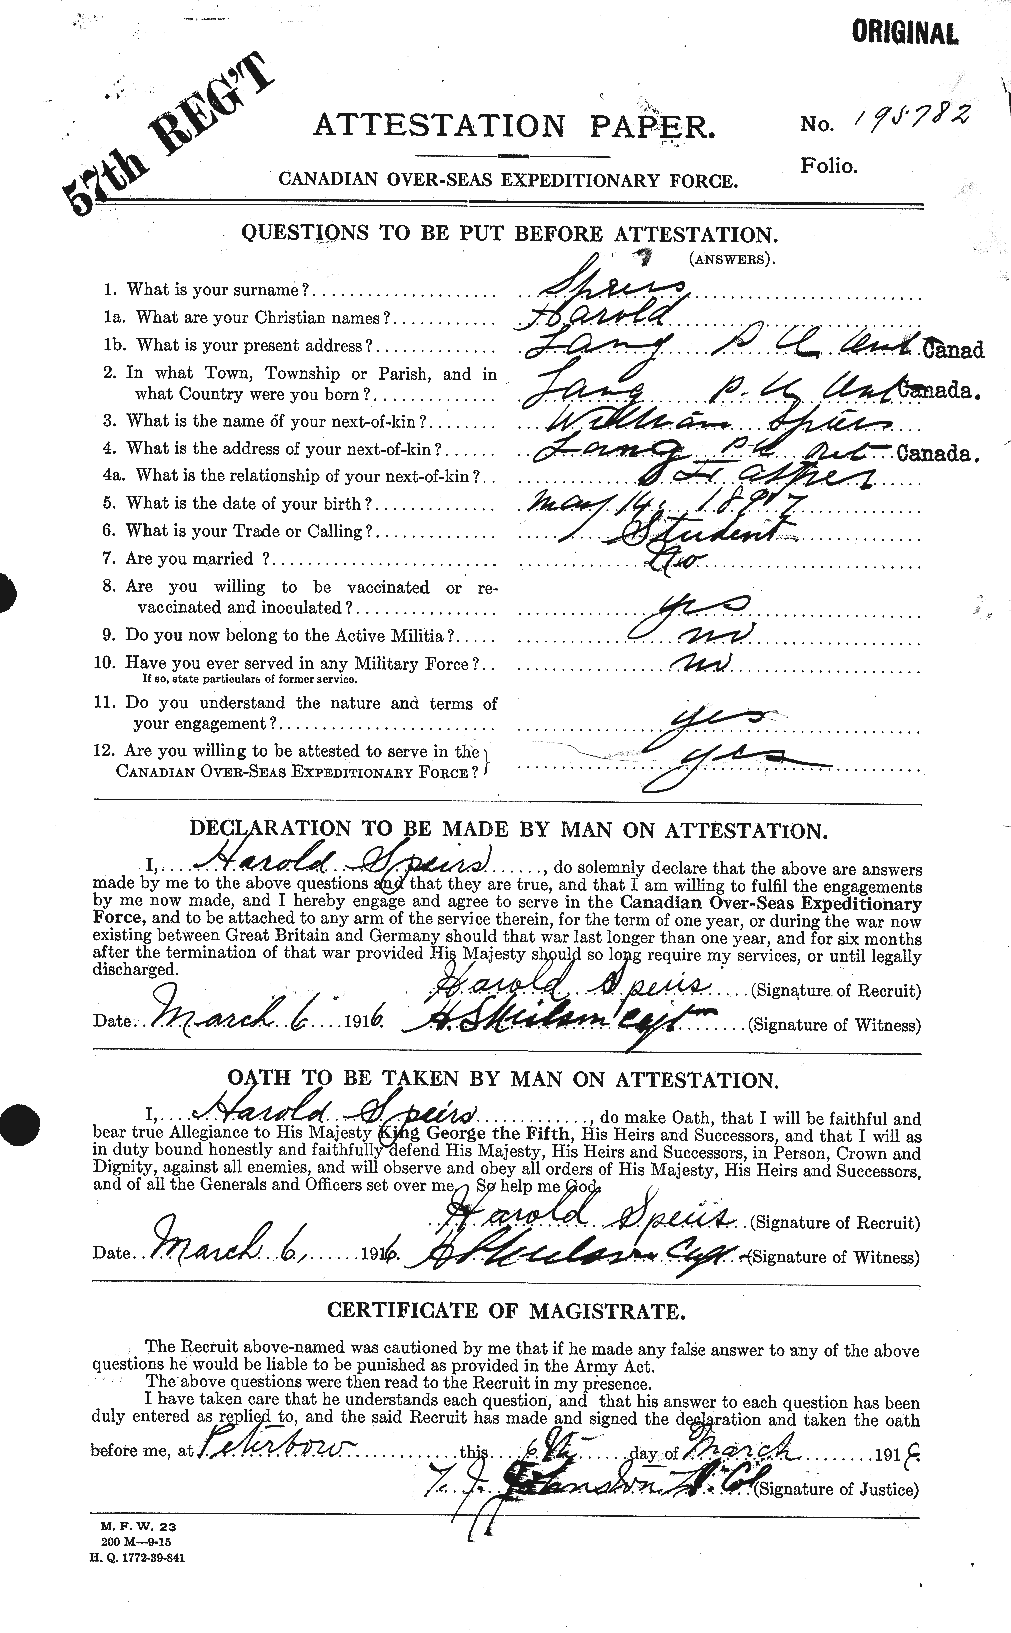 Personnel Records of the First World War - CEF 109933a